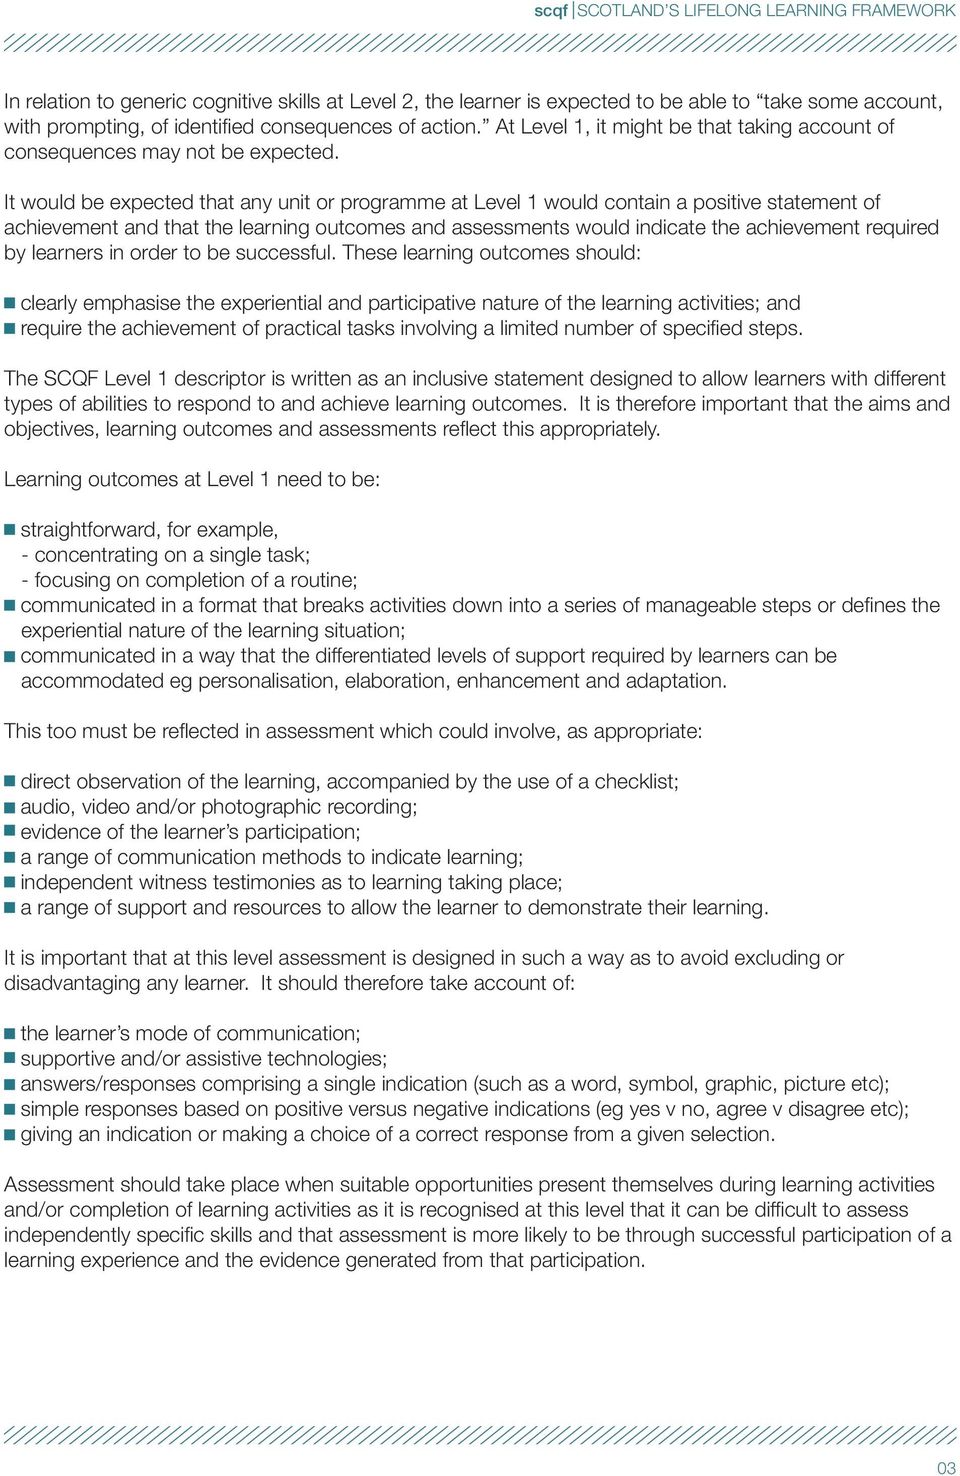 It would be expected that any unit or programme at Level 1 would contain a positive statement of achievement and that the learning outcomes and assessments would indicate the achievement required by